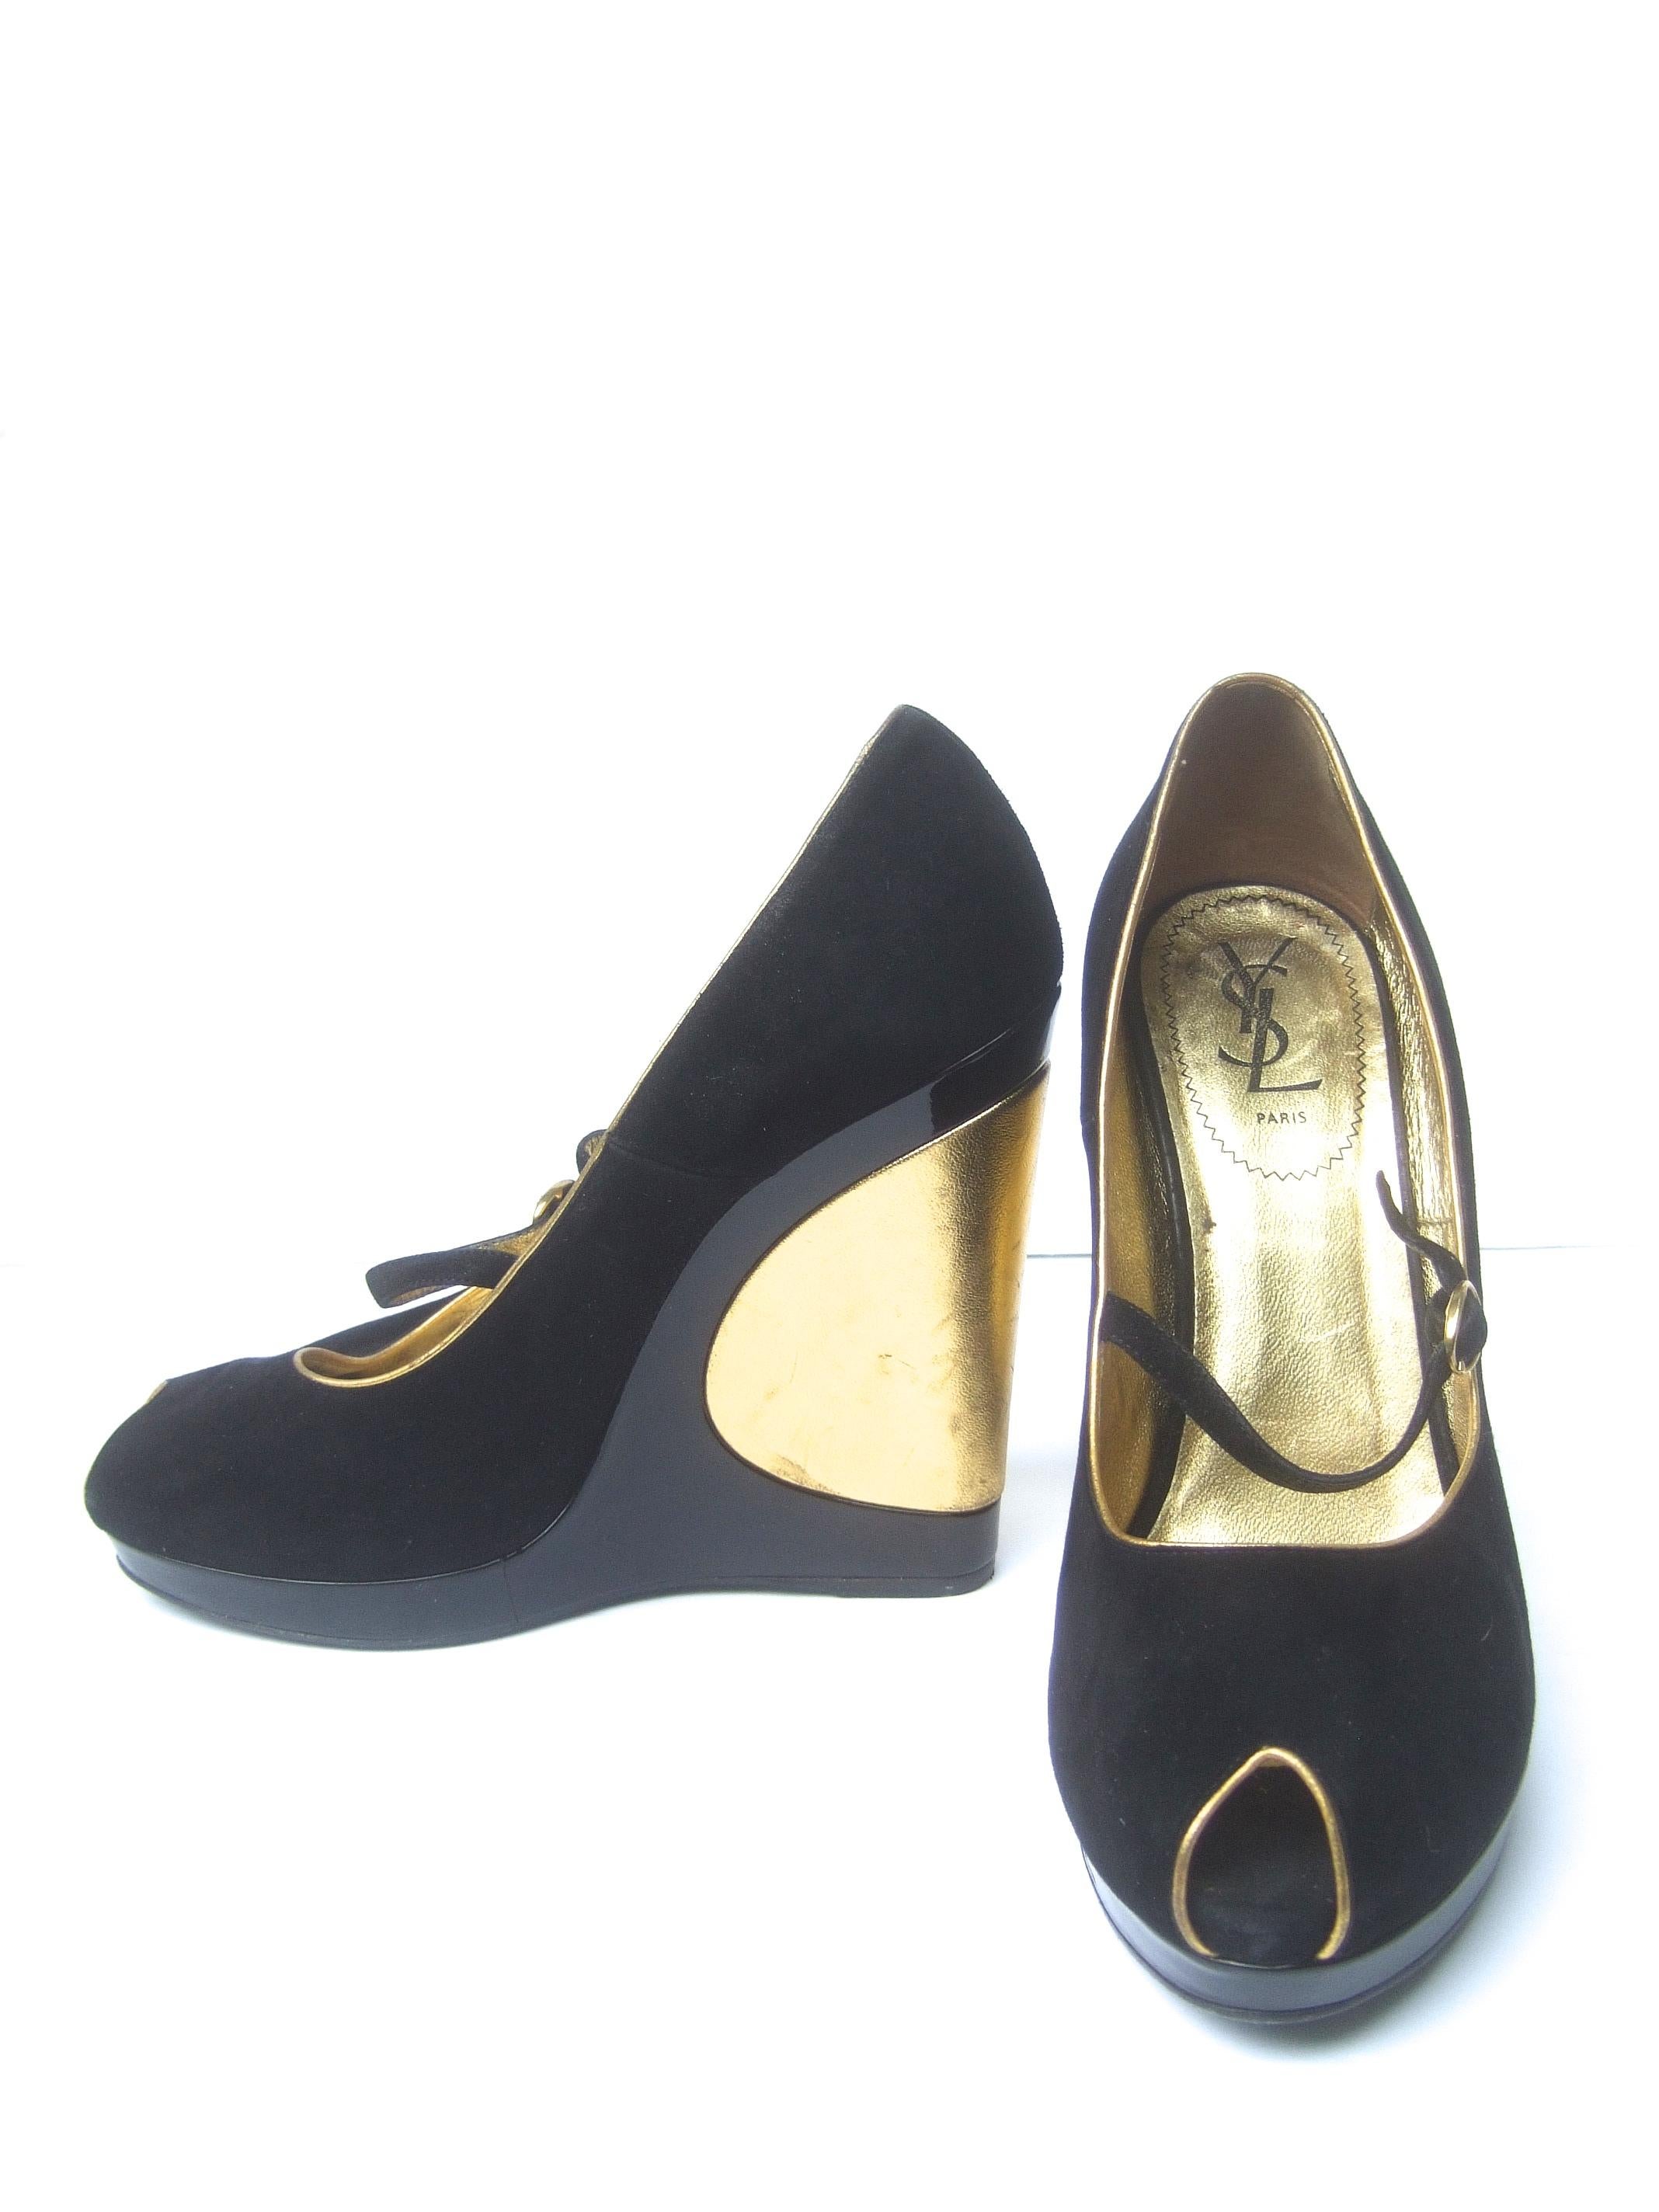 Yves Saint Laurent Paris Black Suede Gold Leather Peep Toe Wedge Shoes Size 40 In Good Condition For Sale In University City, MO